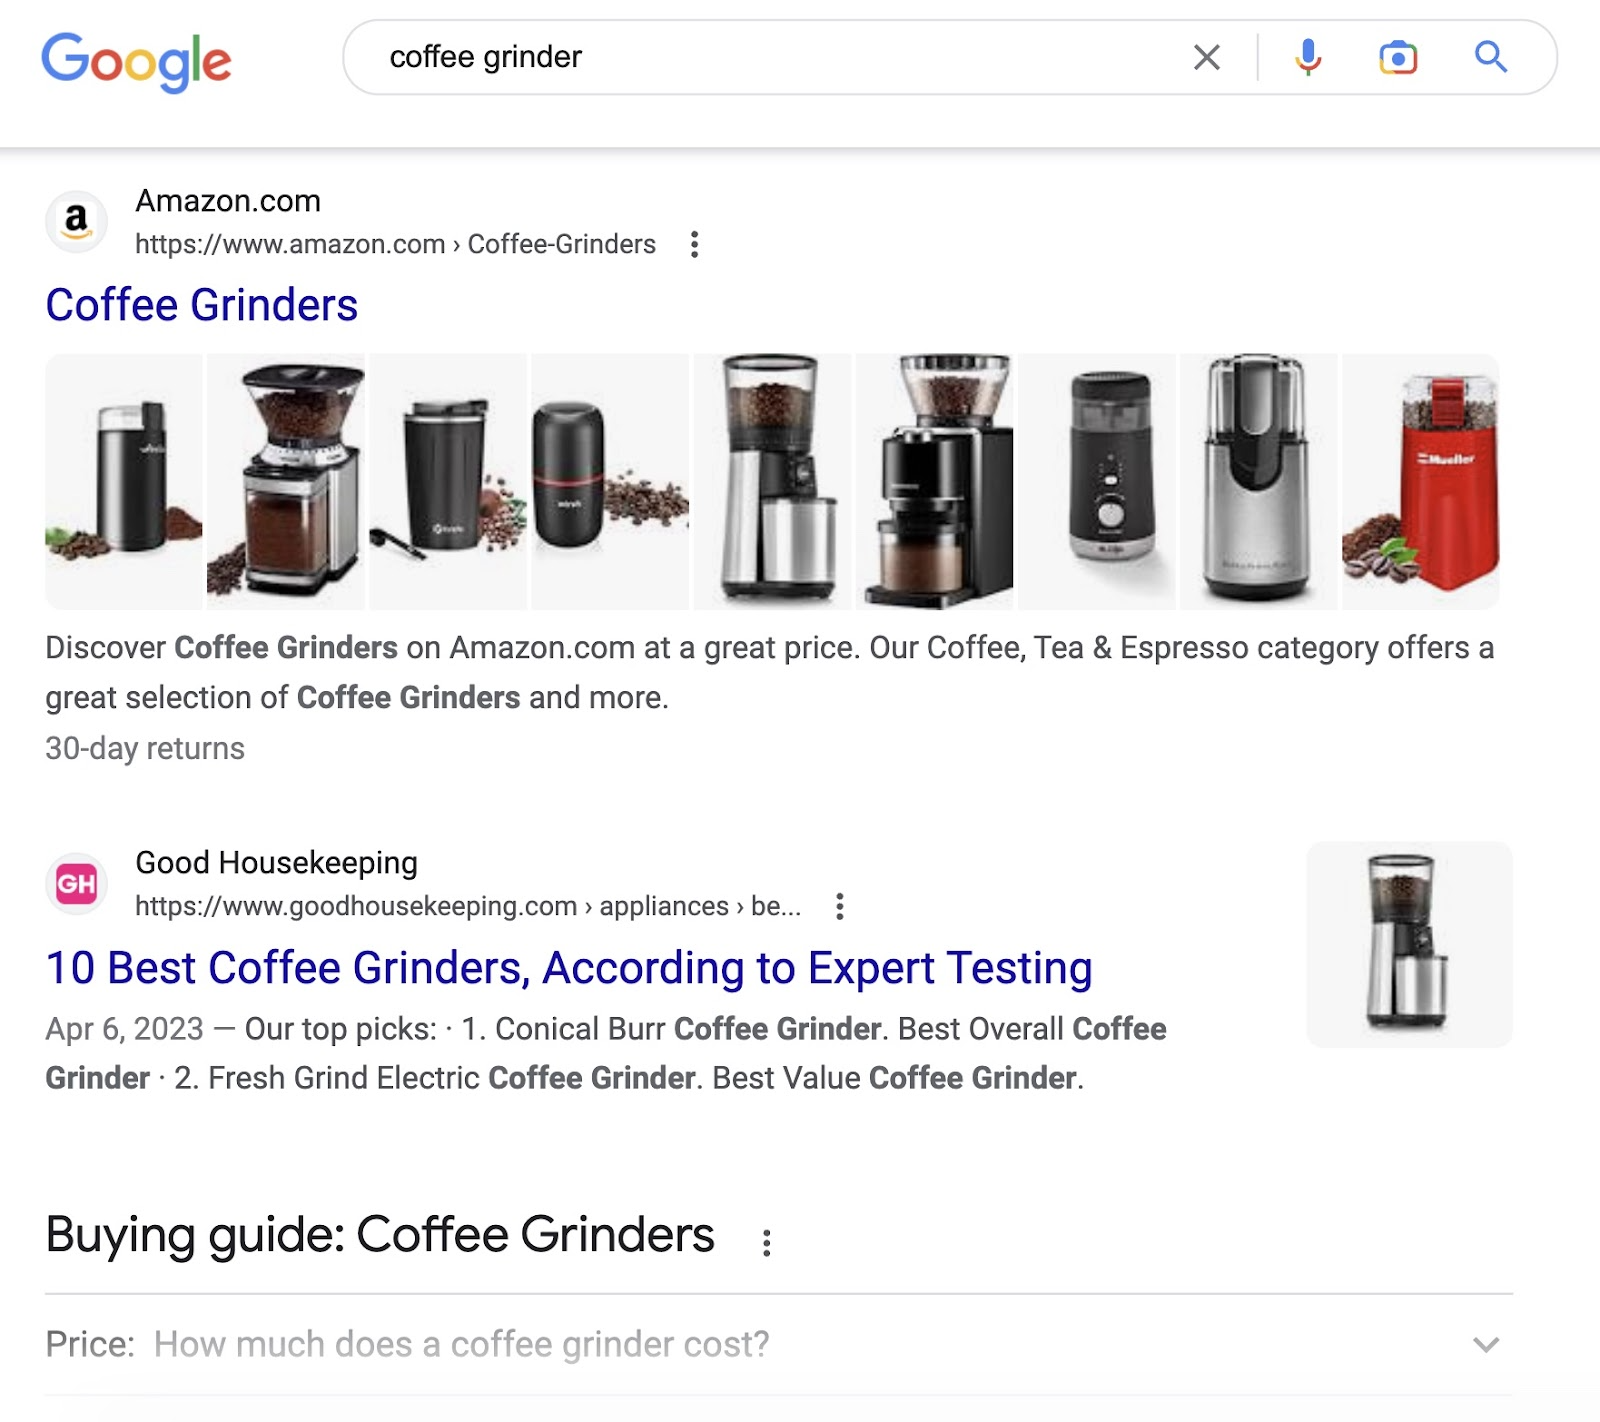 Google search for “coffee grinder”